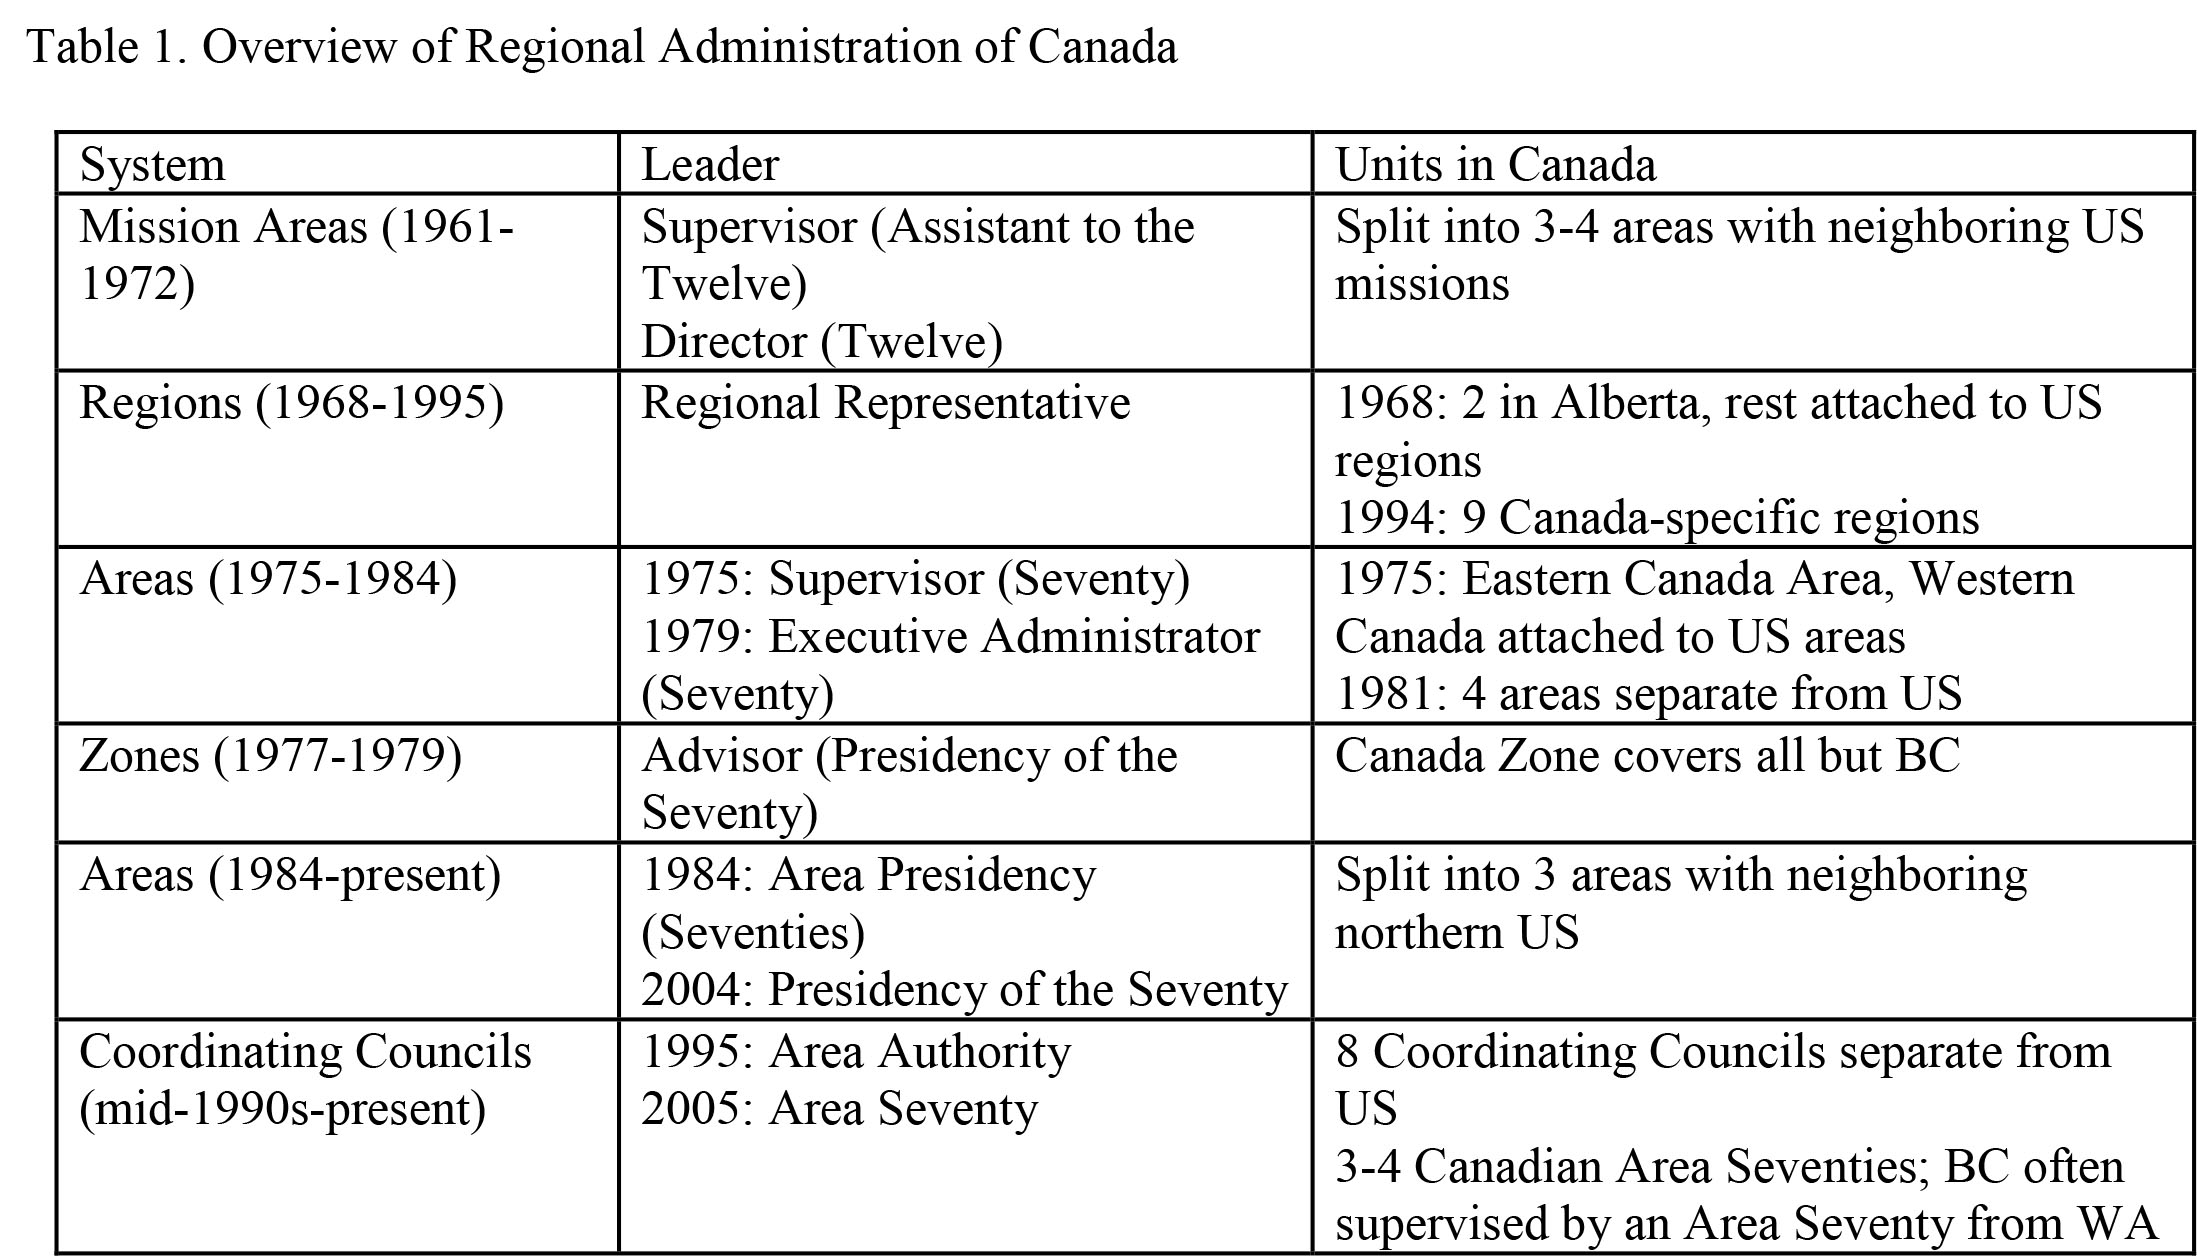 table 1: Overview of Regional Administration of Canada